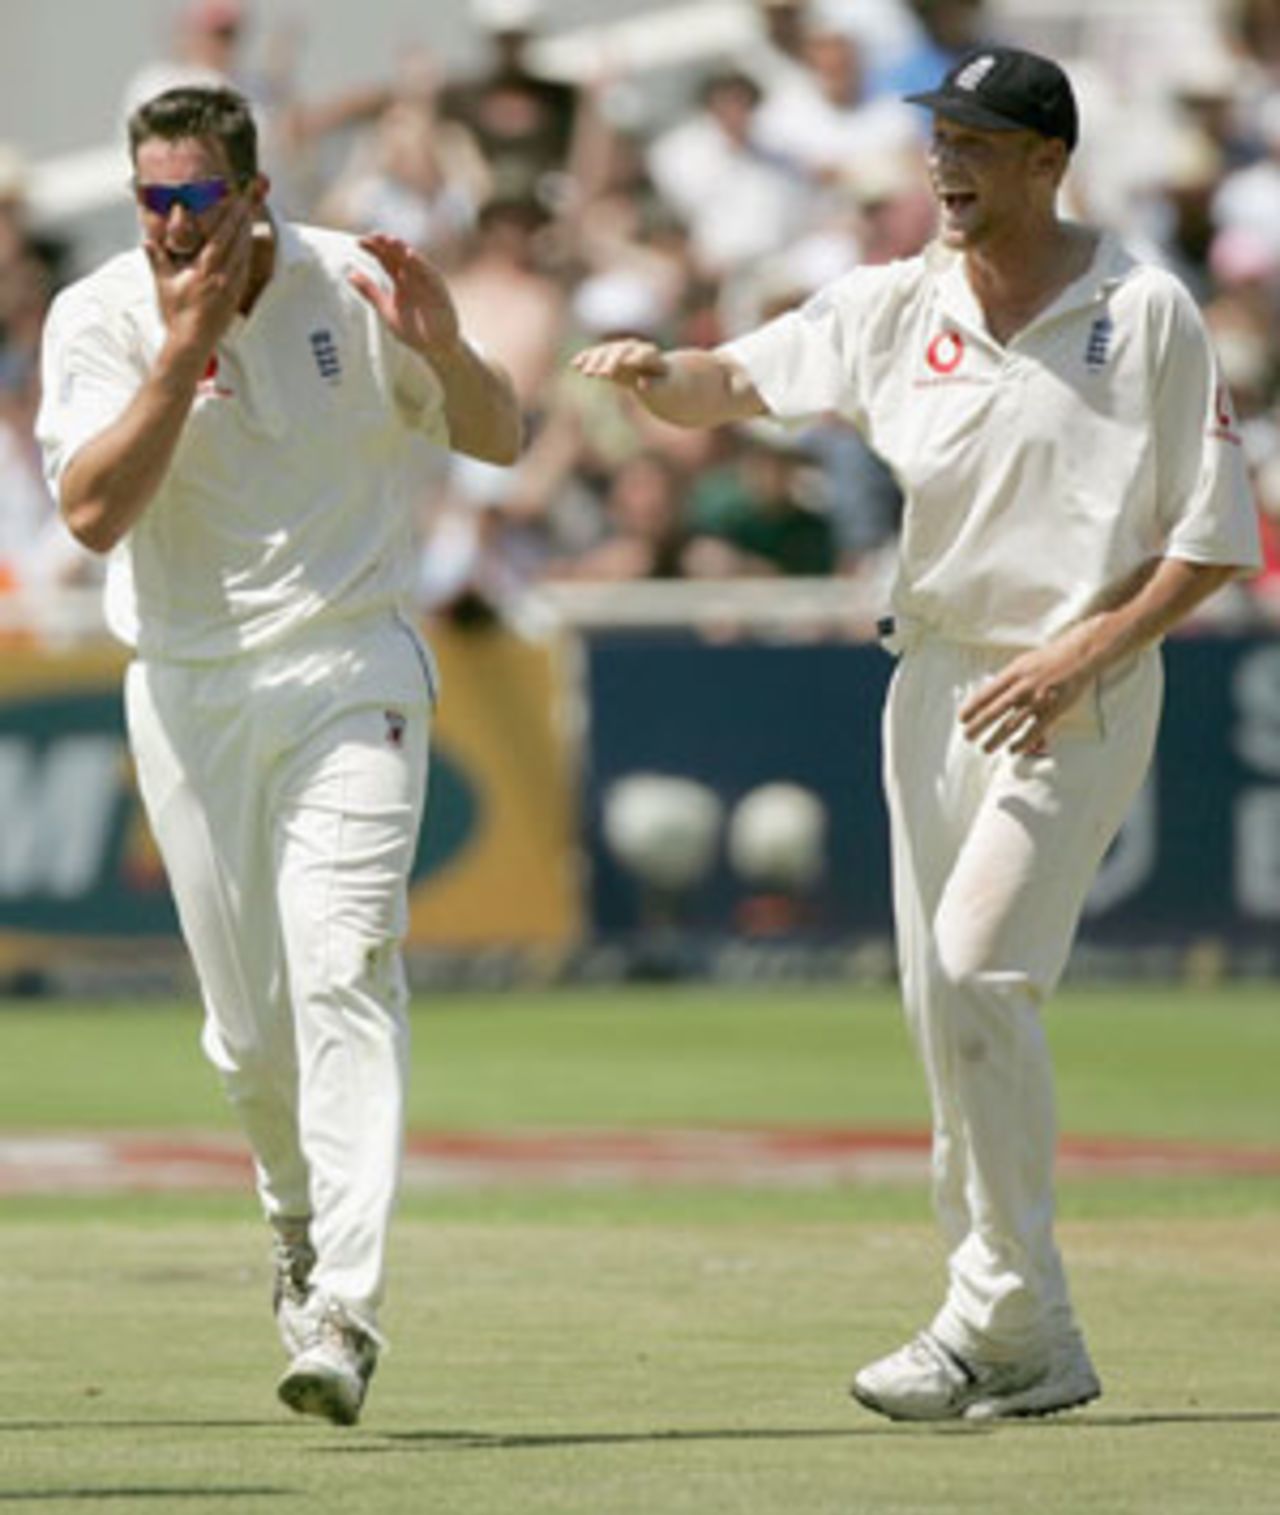 Ashley Giles clutches his face after Andrew Flinfoff slugged him while celebrating Graeme Smith's dismissal, South Africa v England, 3rd Test, Cape Town, 1st day, January 2, 2005